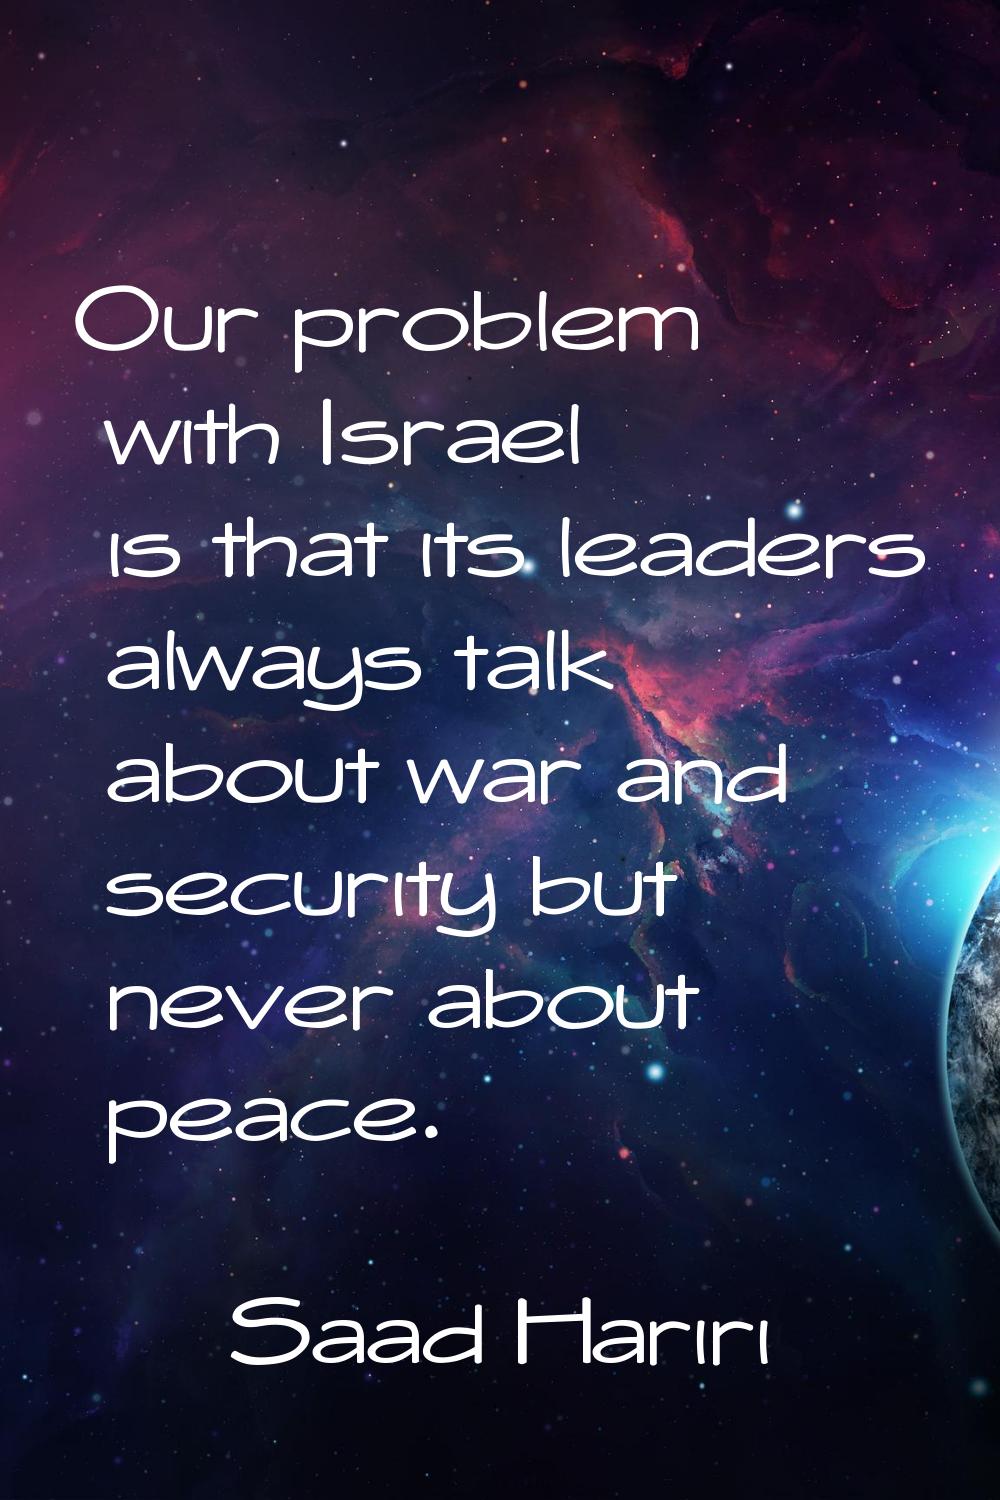 Our problem with Israel is that its leaders always talk about war and security but never about peac